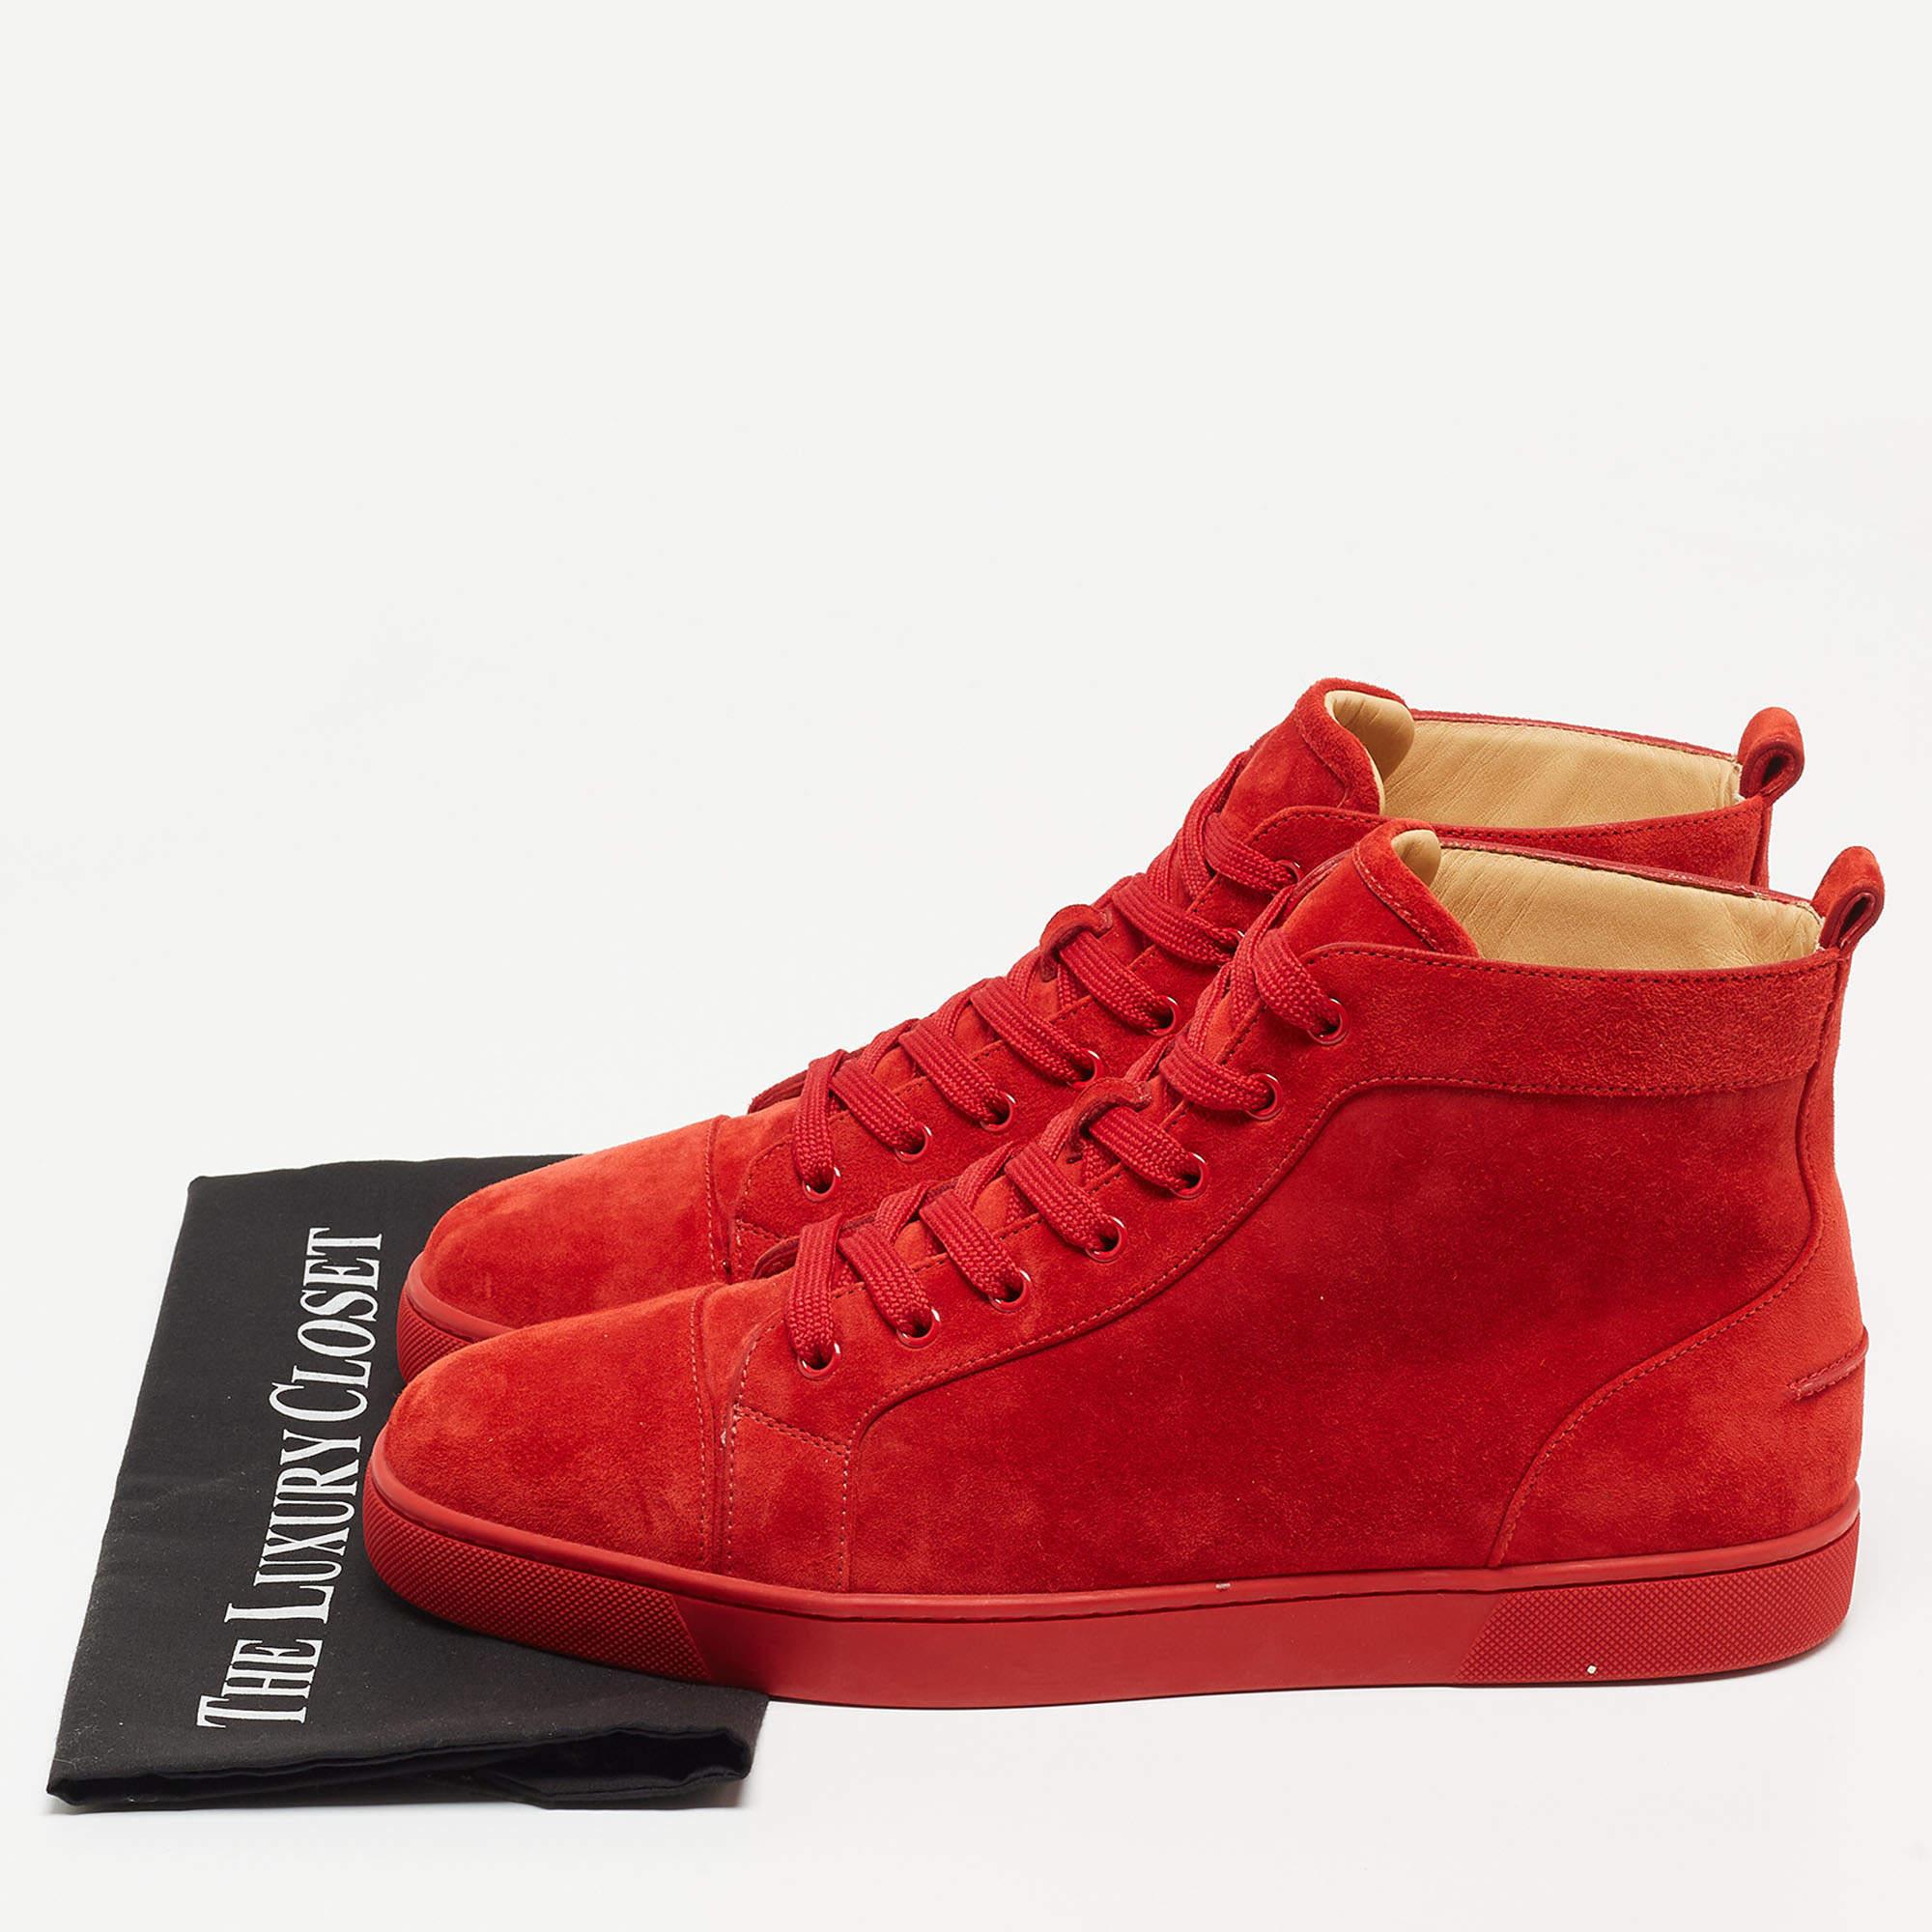 Christian Louboutin Red suede Louis High Top Sneakers Size 44.5 5